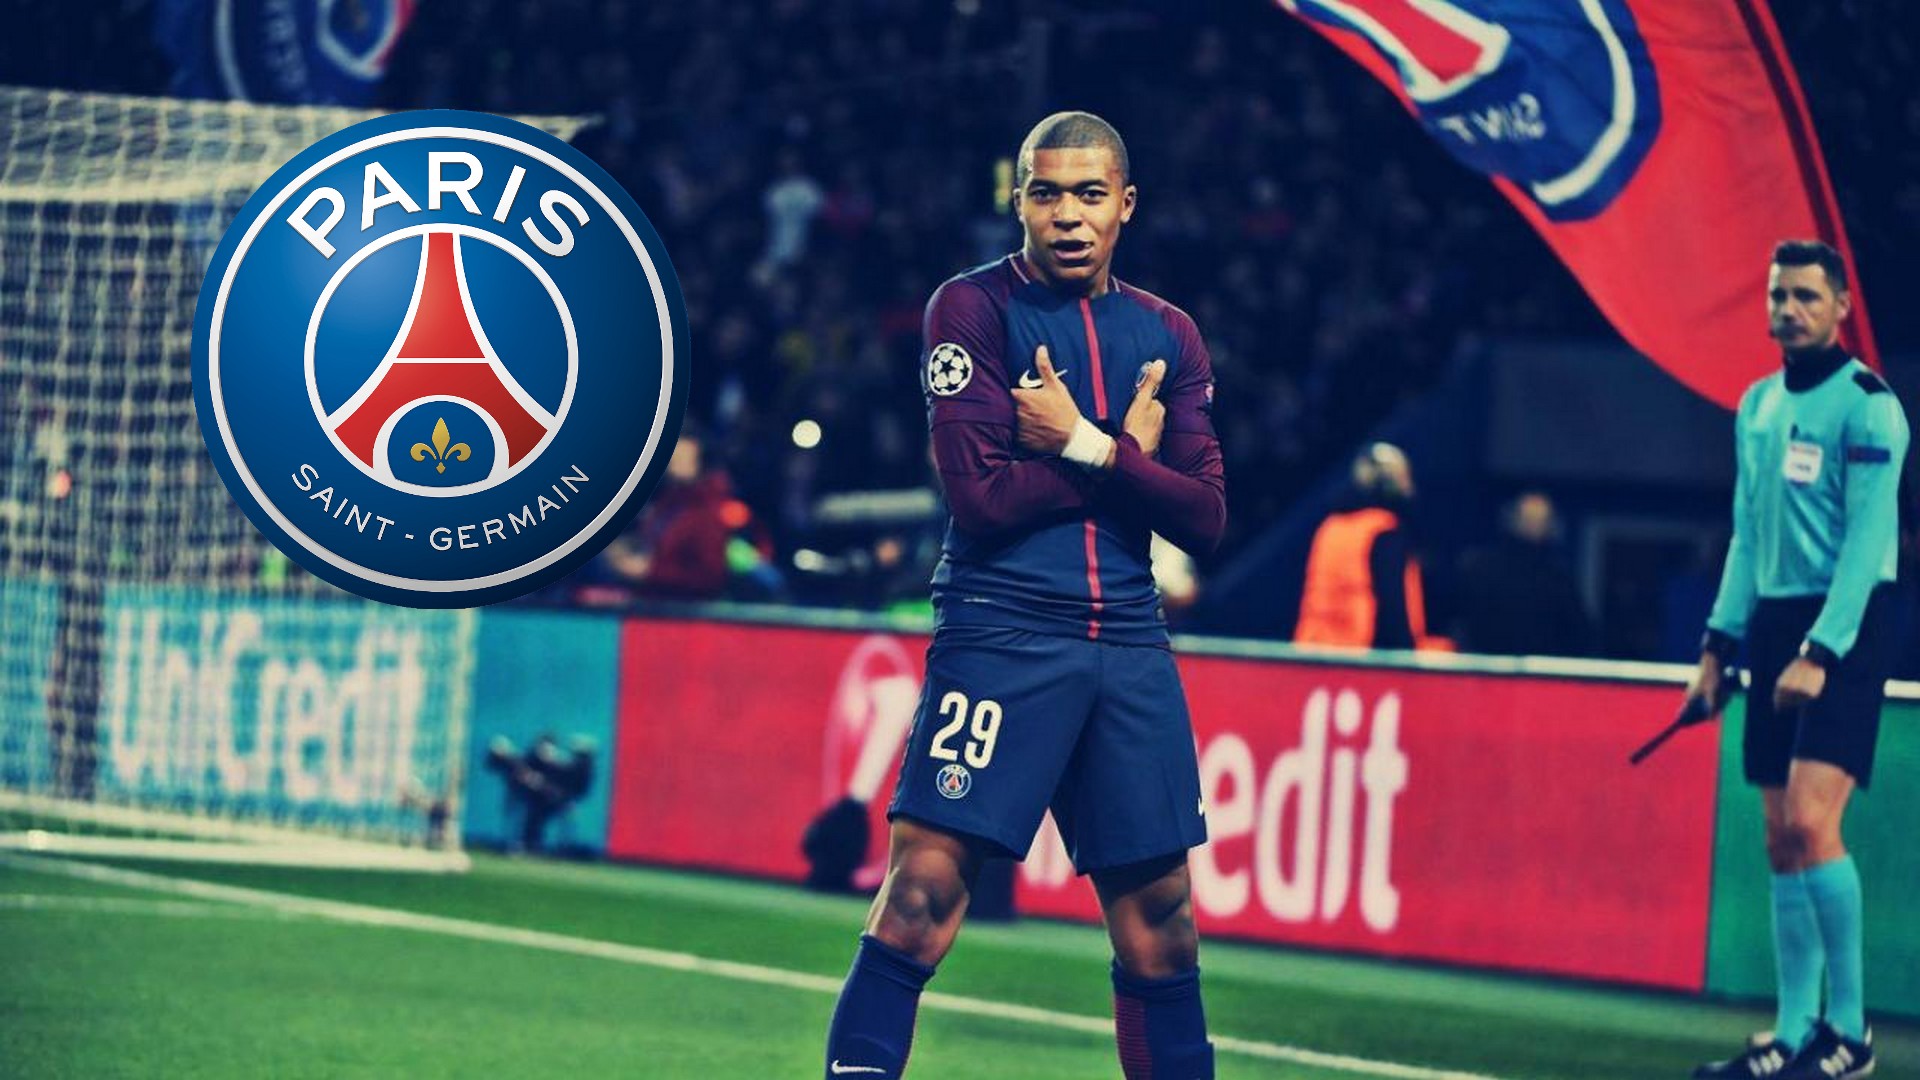 Kylian Mbappe PSG Wallpaper HD With Resolution 1920X1080 pixel. You can make this wallpaper for your Mac or Windows Desktop Background, iPhone, Android or Tablet and another Smartphone device for free